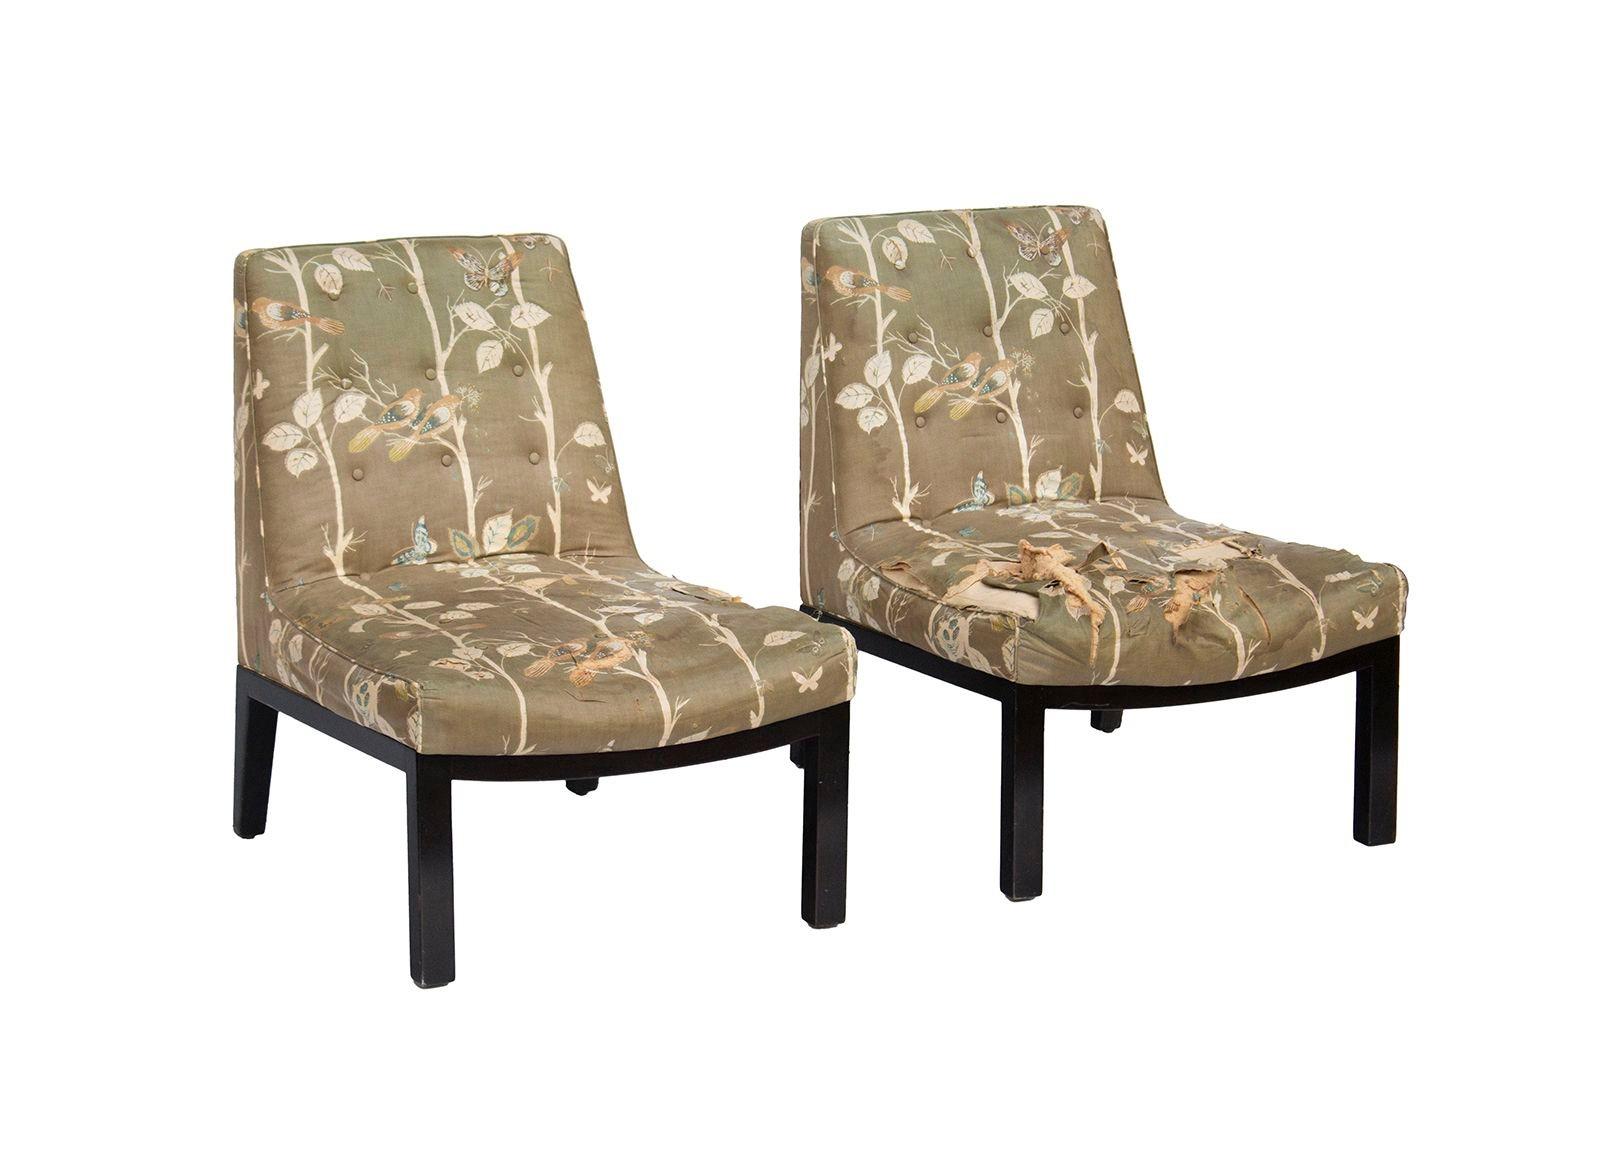 Mid-Century Modern Tufted Slipper Chairs by Edward Wormley for Dunbar, pair For Sale